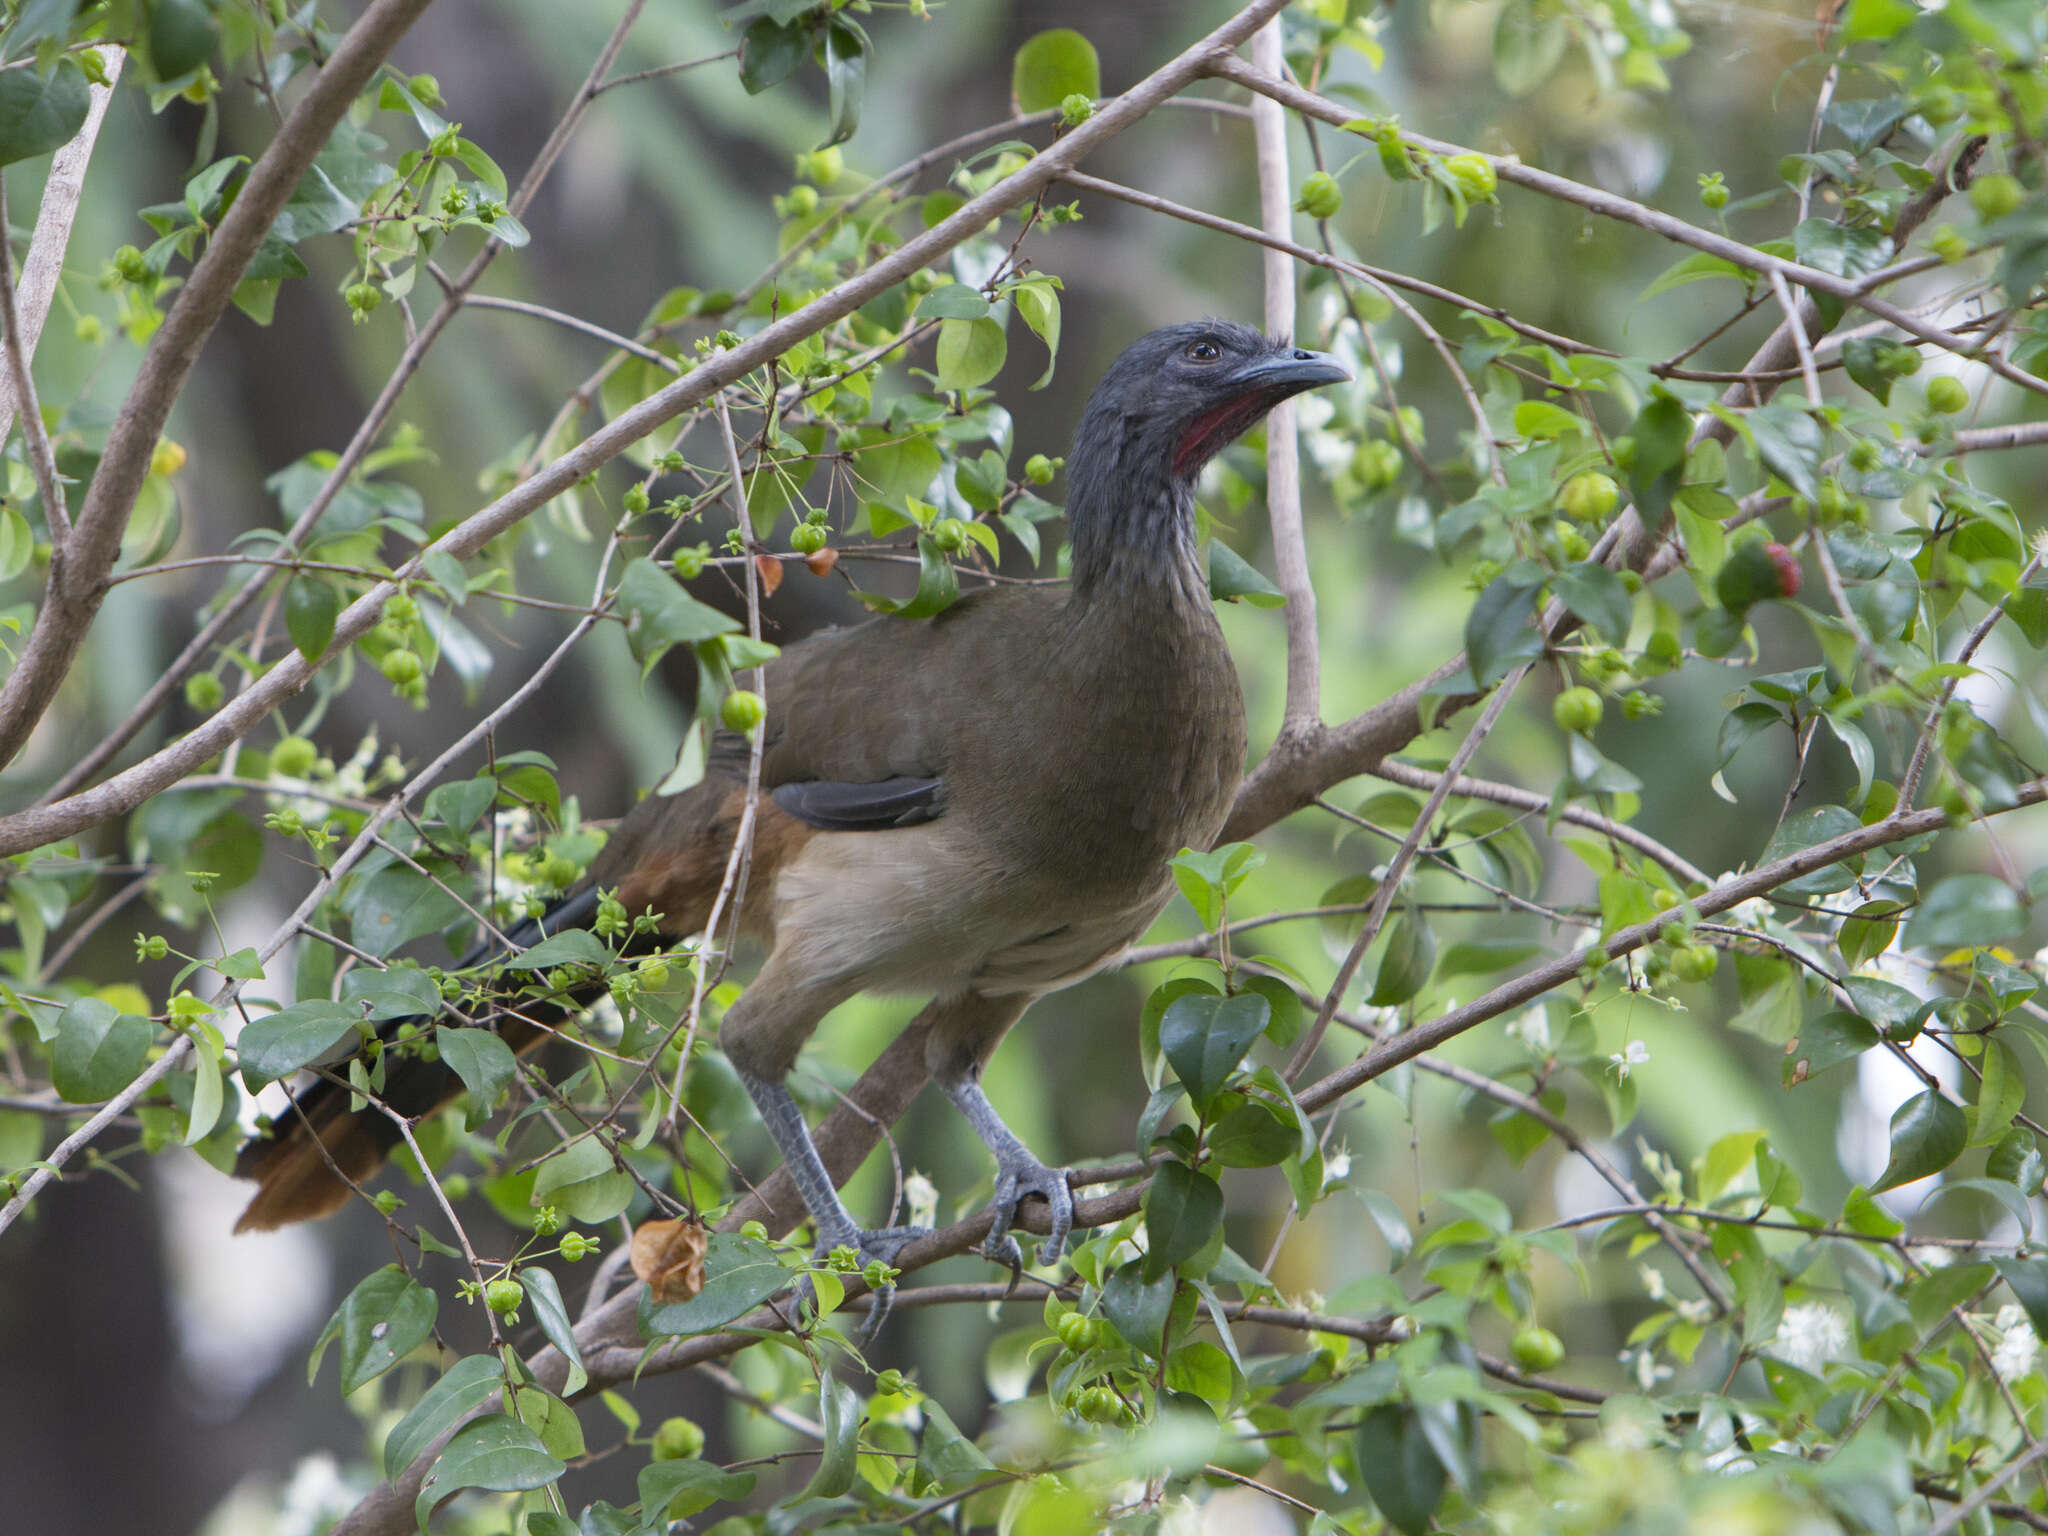 Image of Rufous-vented Chachalaca